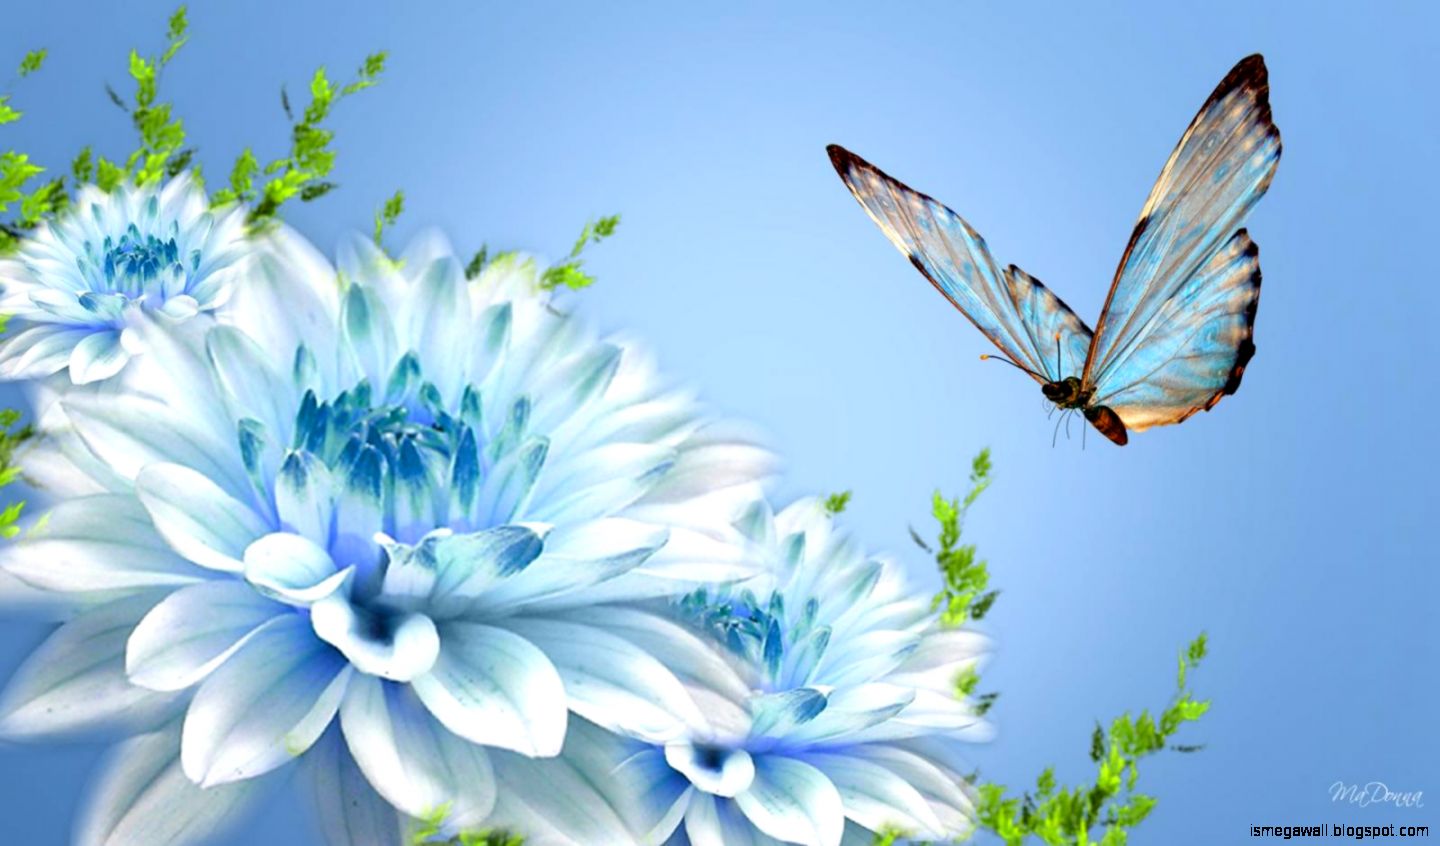 Wallpaper Pictures Of Flowers And Butterflies